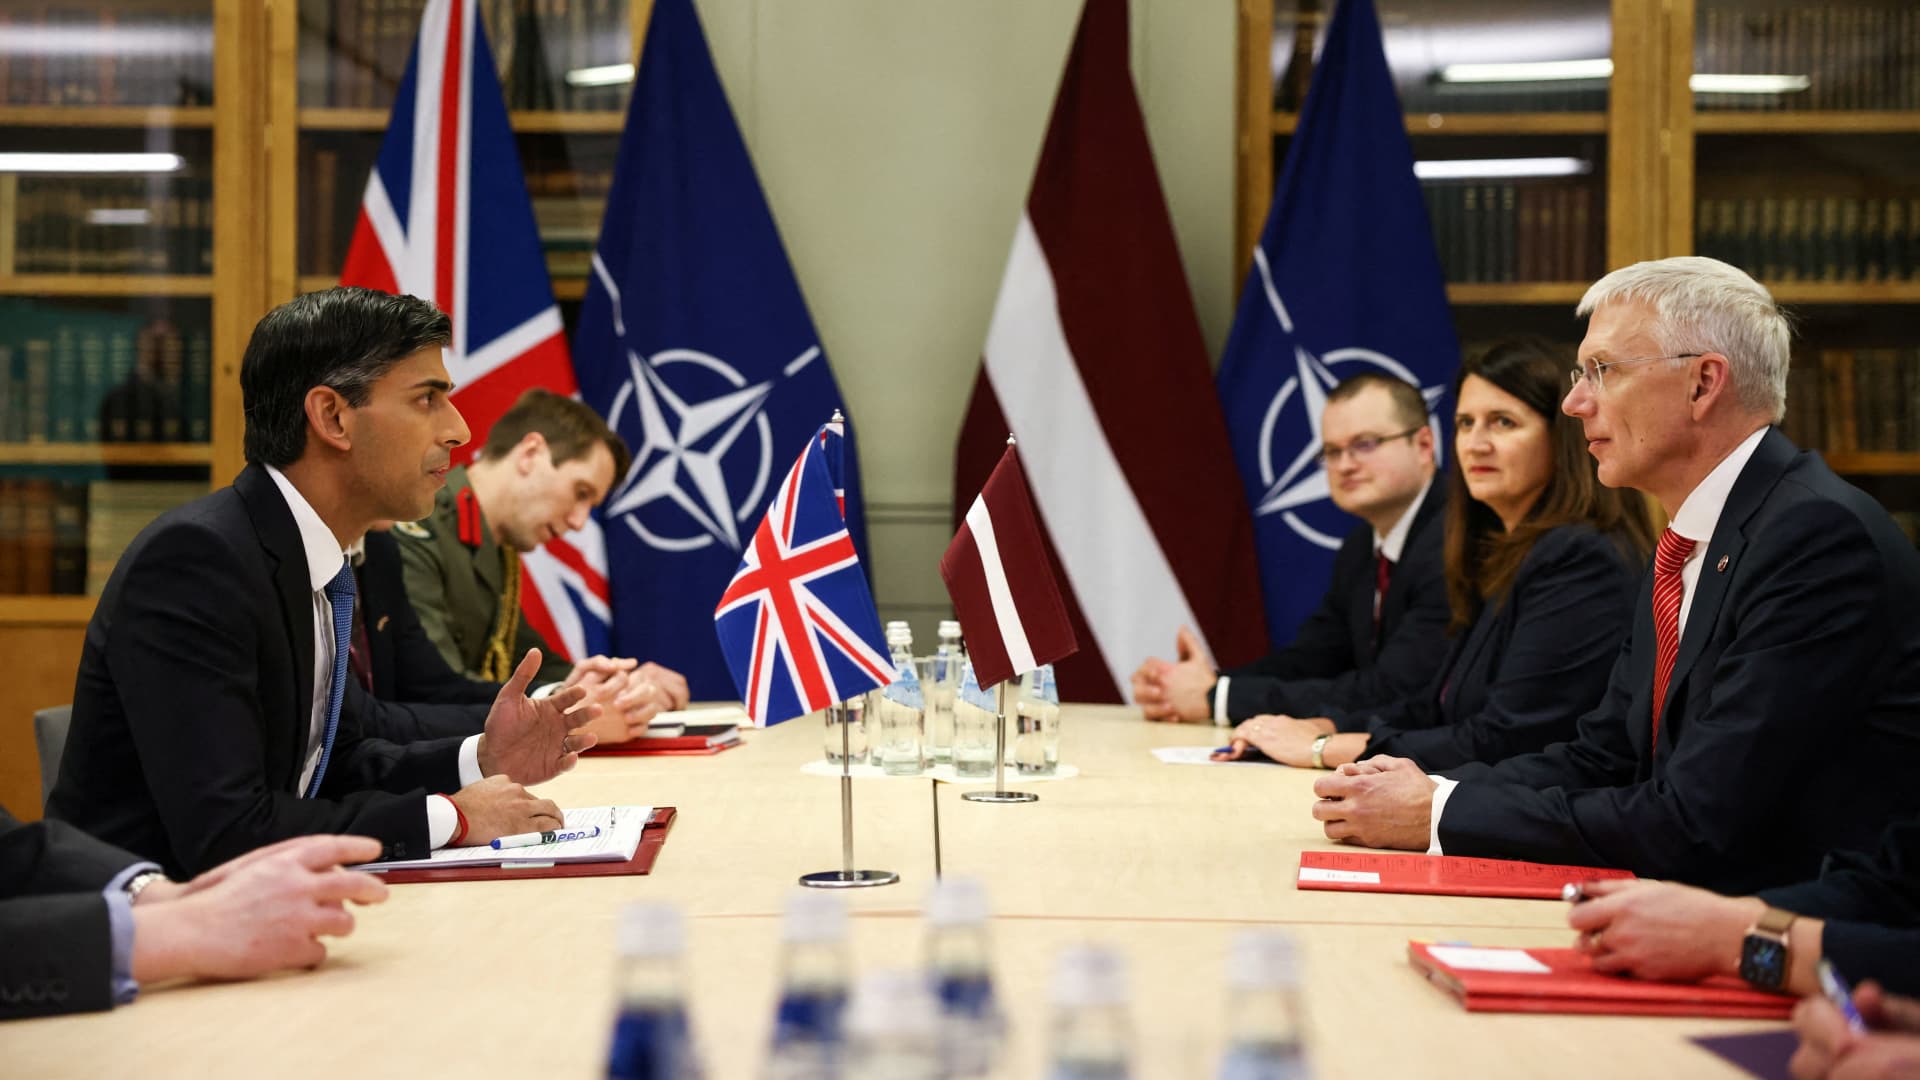 British Prime Minister Rishi Sunak (L) attends a bilateral meeting with Latvian Prime Minister Krisjanis Karins (R) at the Joint Expeditionary Force (JEF) countries leaders' meeting in Riga, Latvia December 19, 2022.